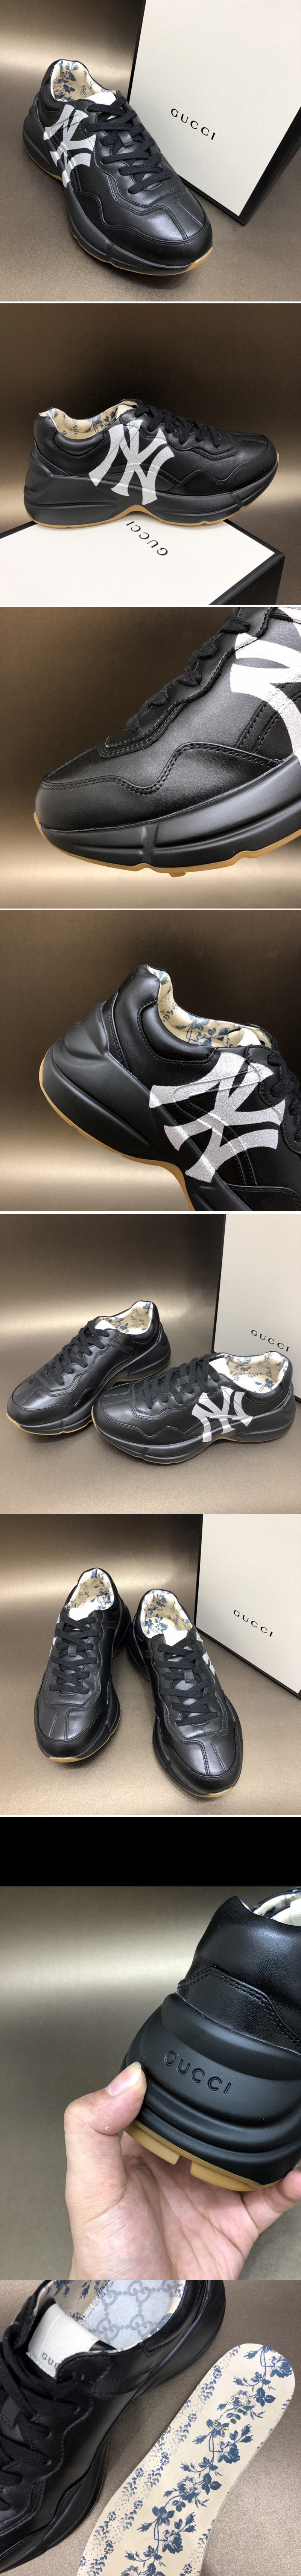 Replica Women and Men Gucci Rhyton Ny Yankees Leather Sneakers in Black Leather